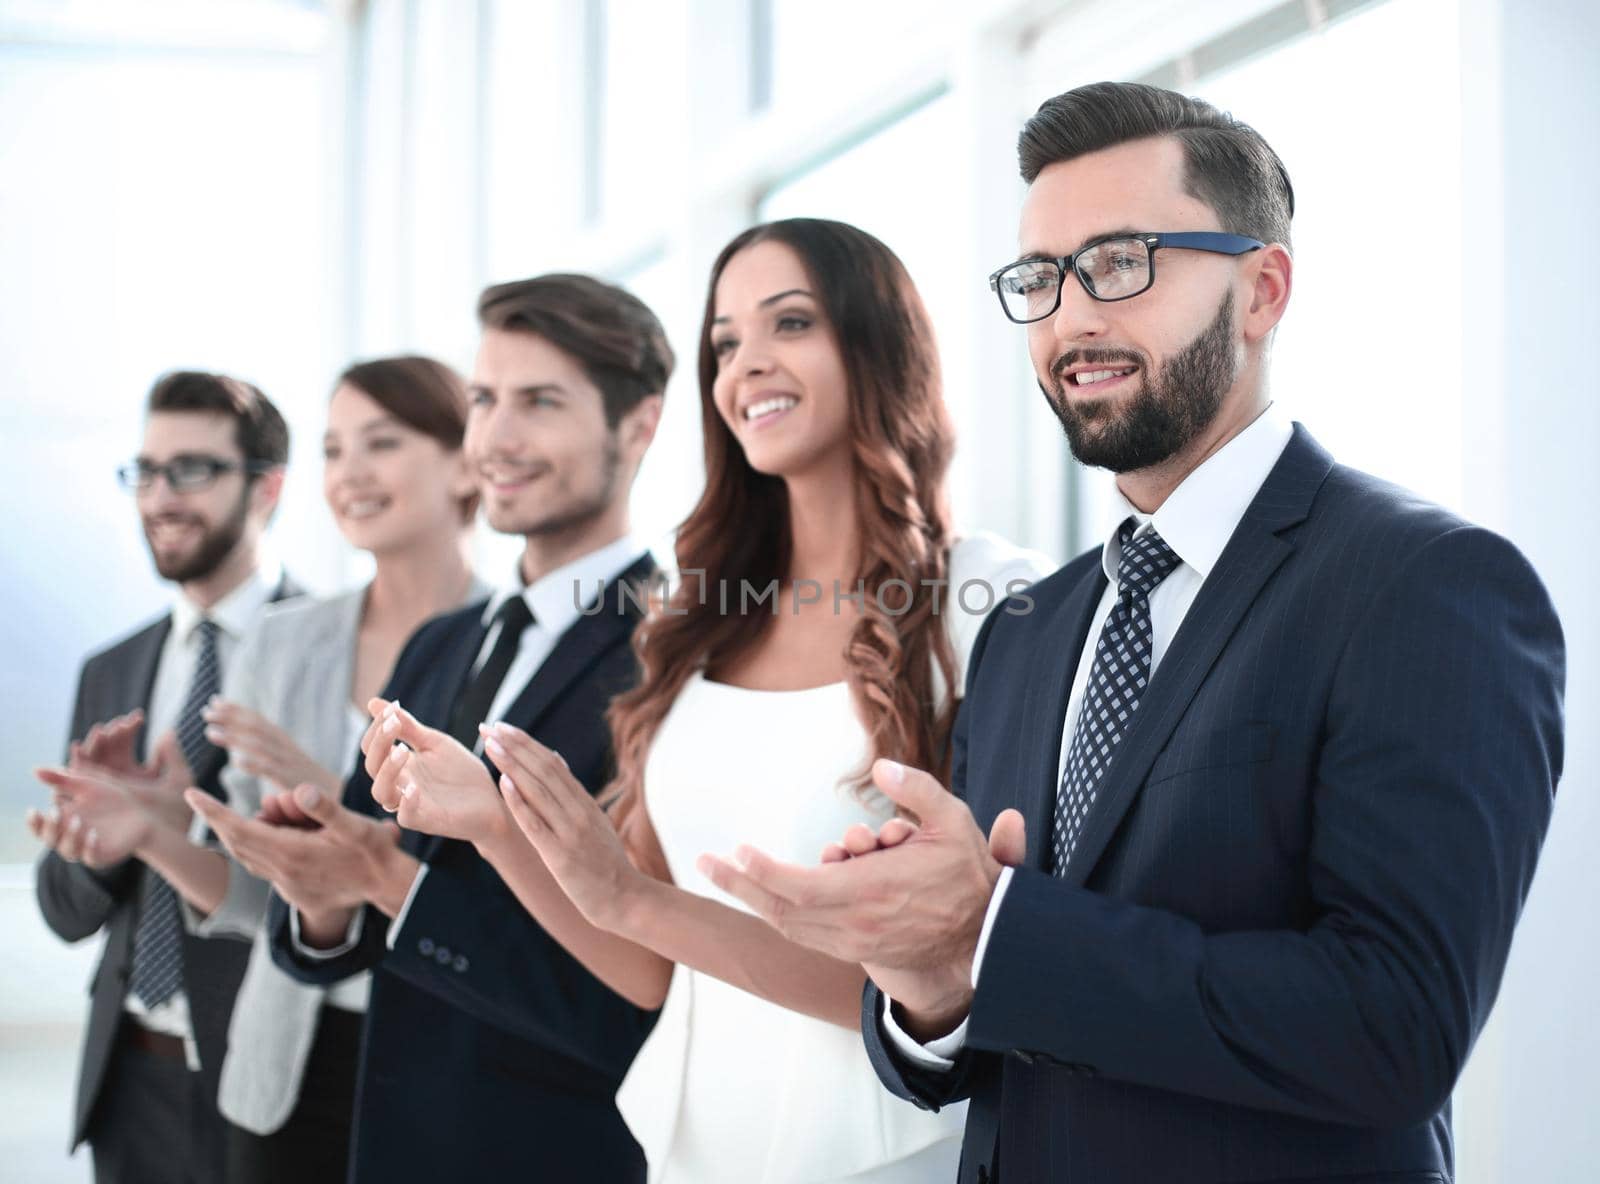 group of business people applauding someone standing in the offi by asdf